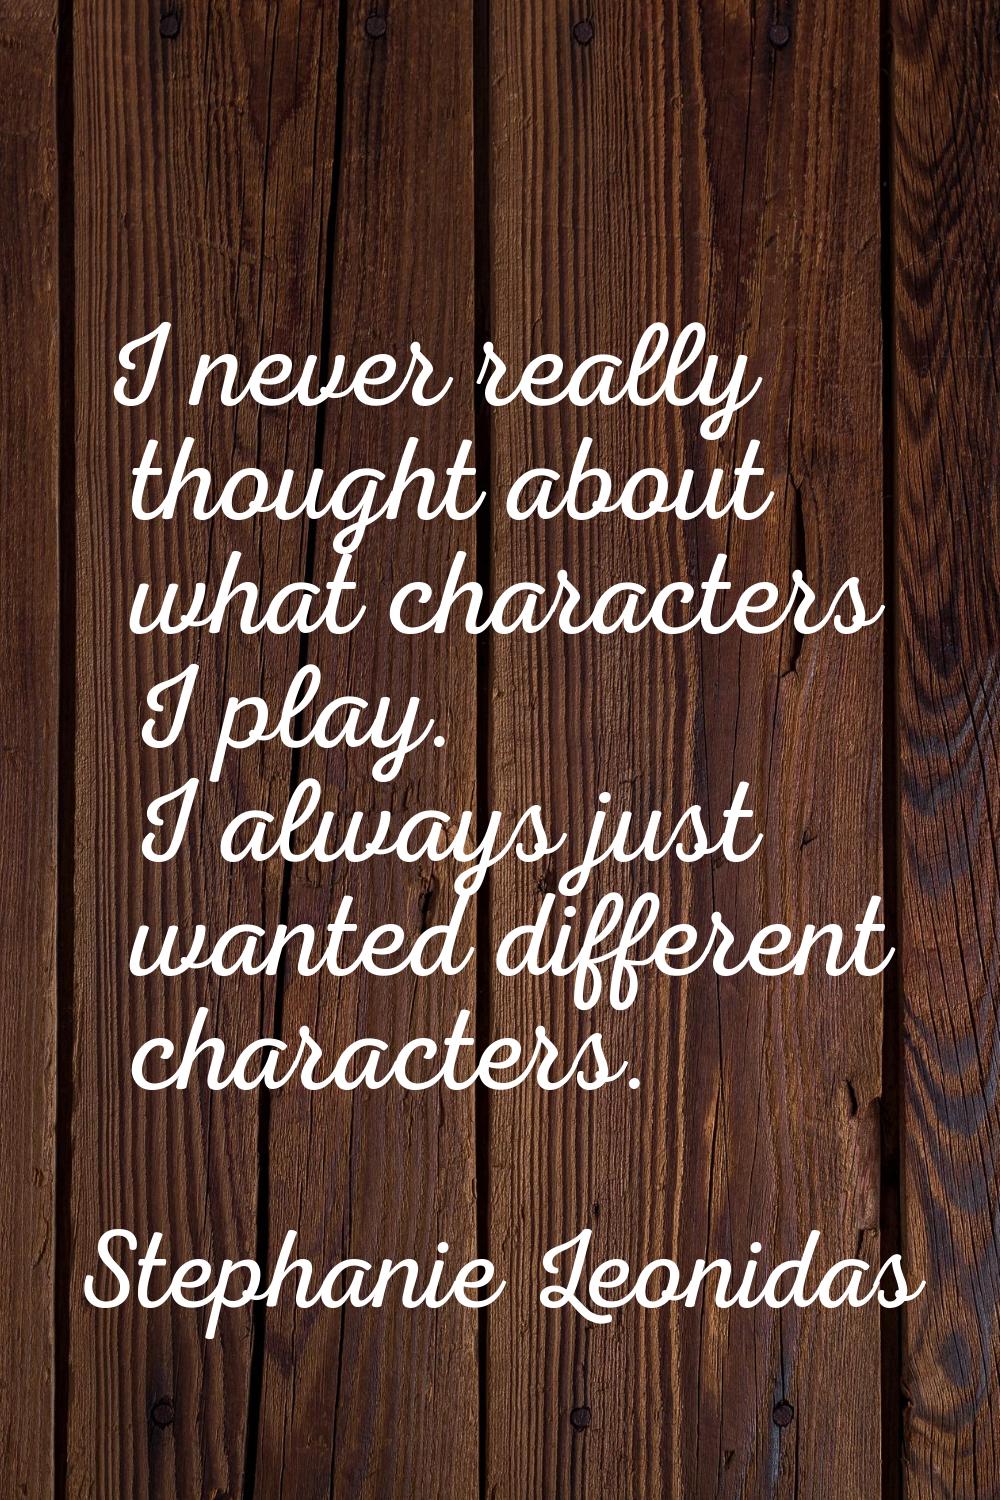 I never really thought about what characters I play. I always just wanted different characters.